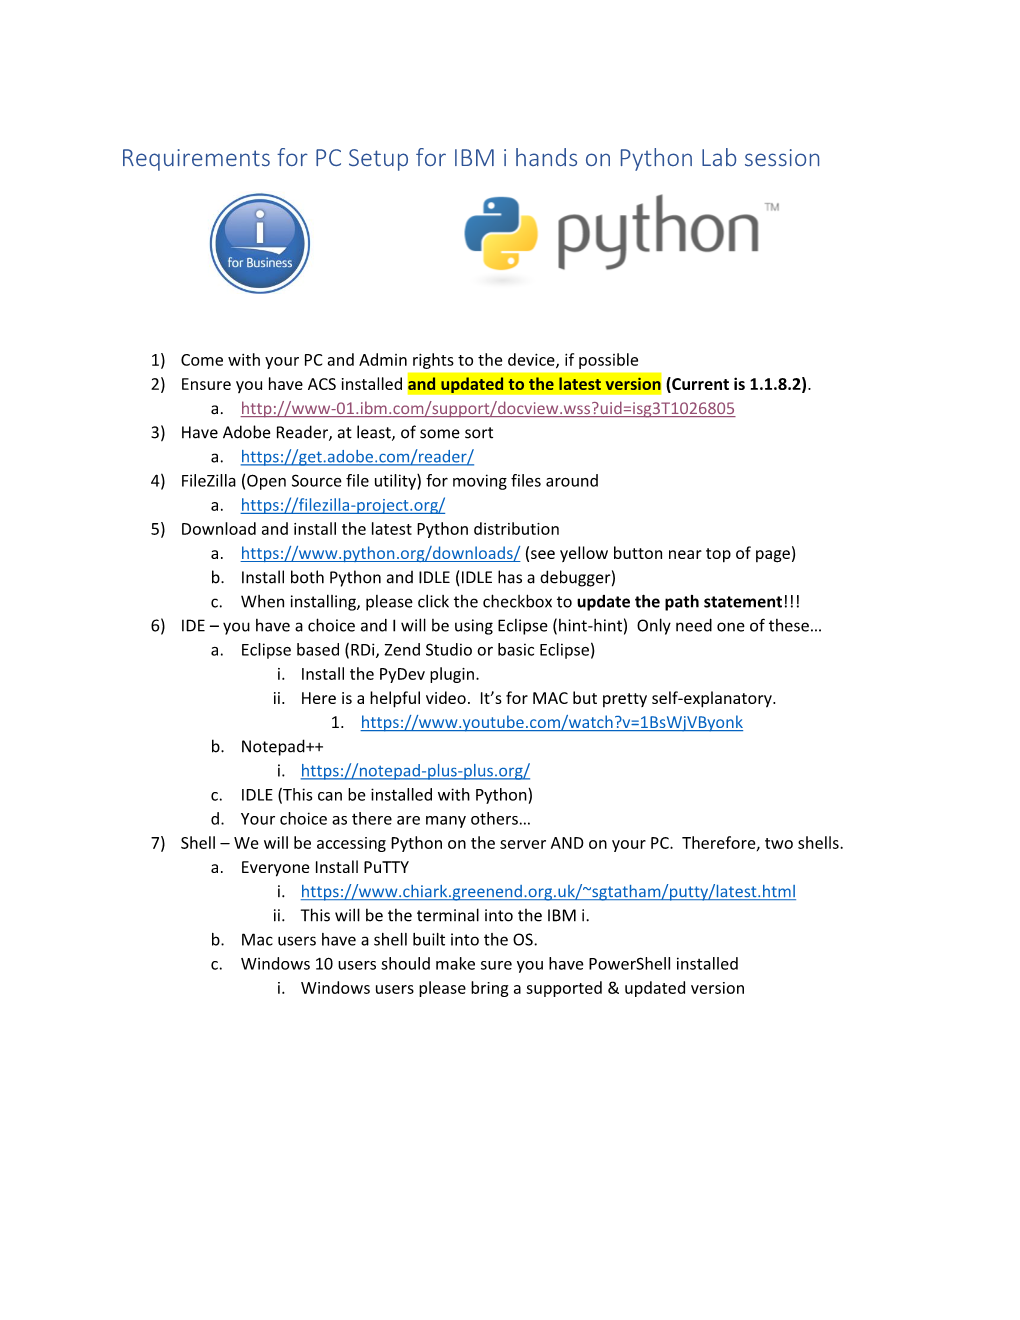 Requirements for PC Setup for IBM I Hands on Python Lab Session